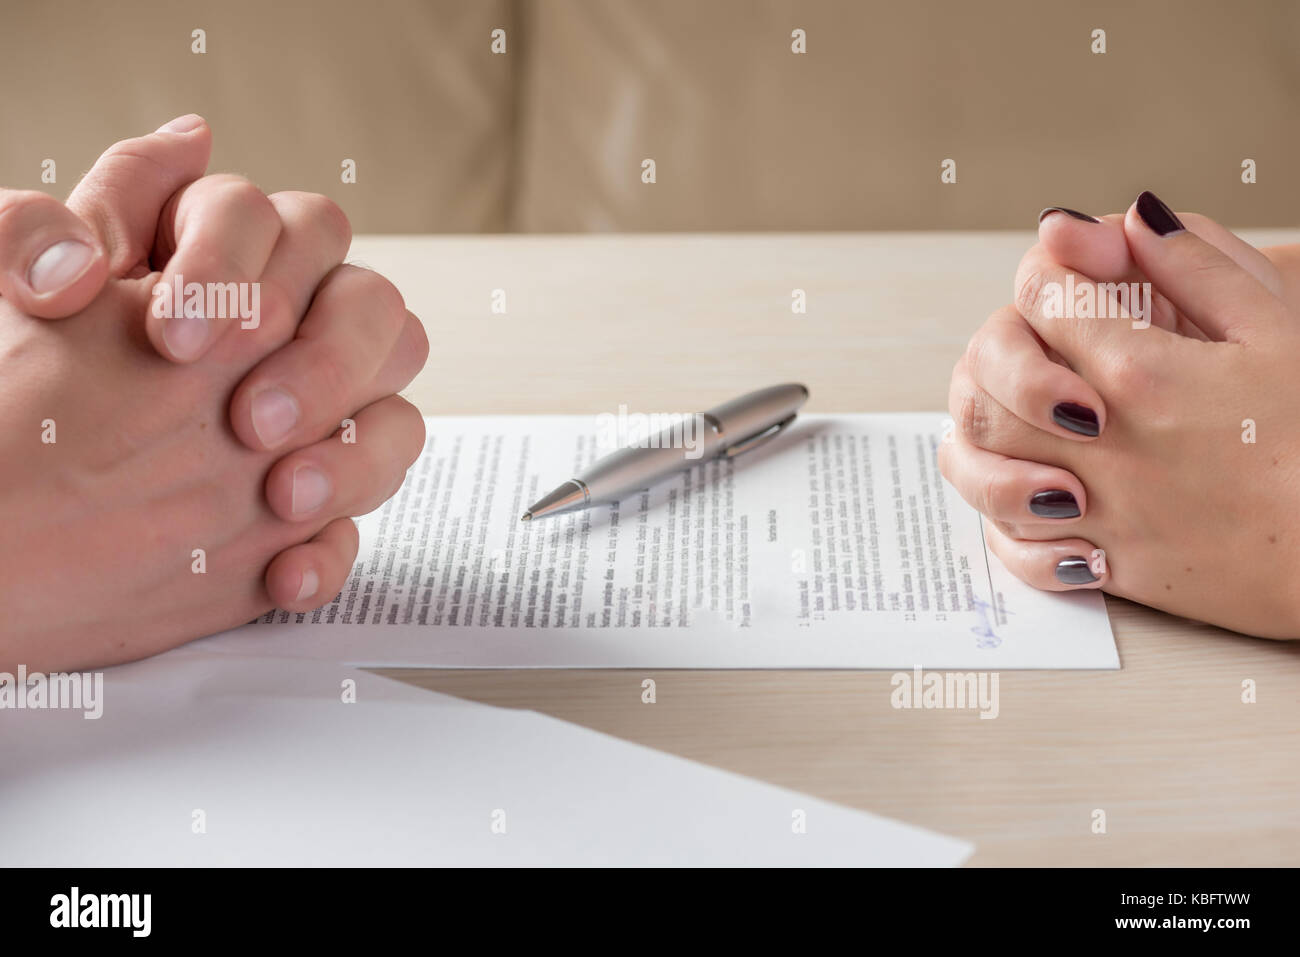 Hands of contractual parties, a woman and a man, signing a contract: business, premarital, loan, mortgage, credit, sales and purchase, investment agre Stock Photo